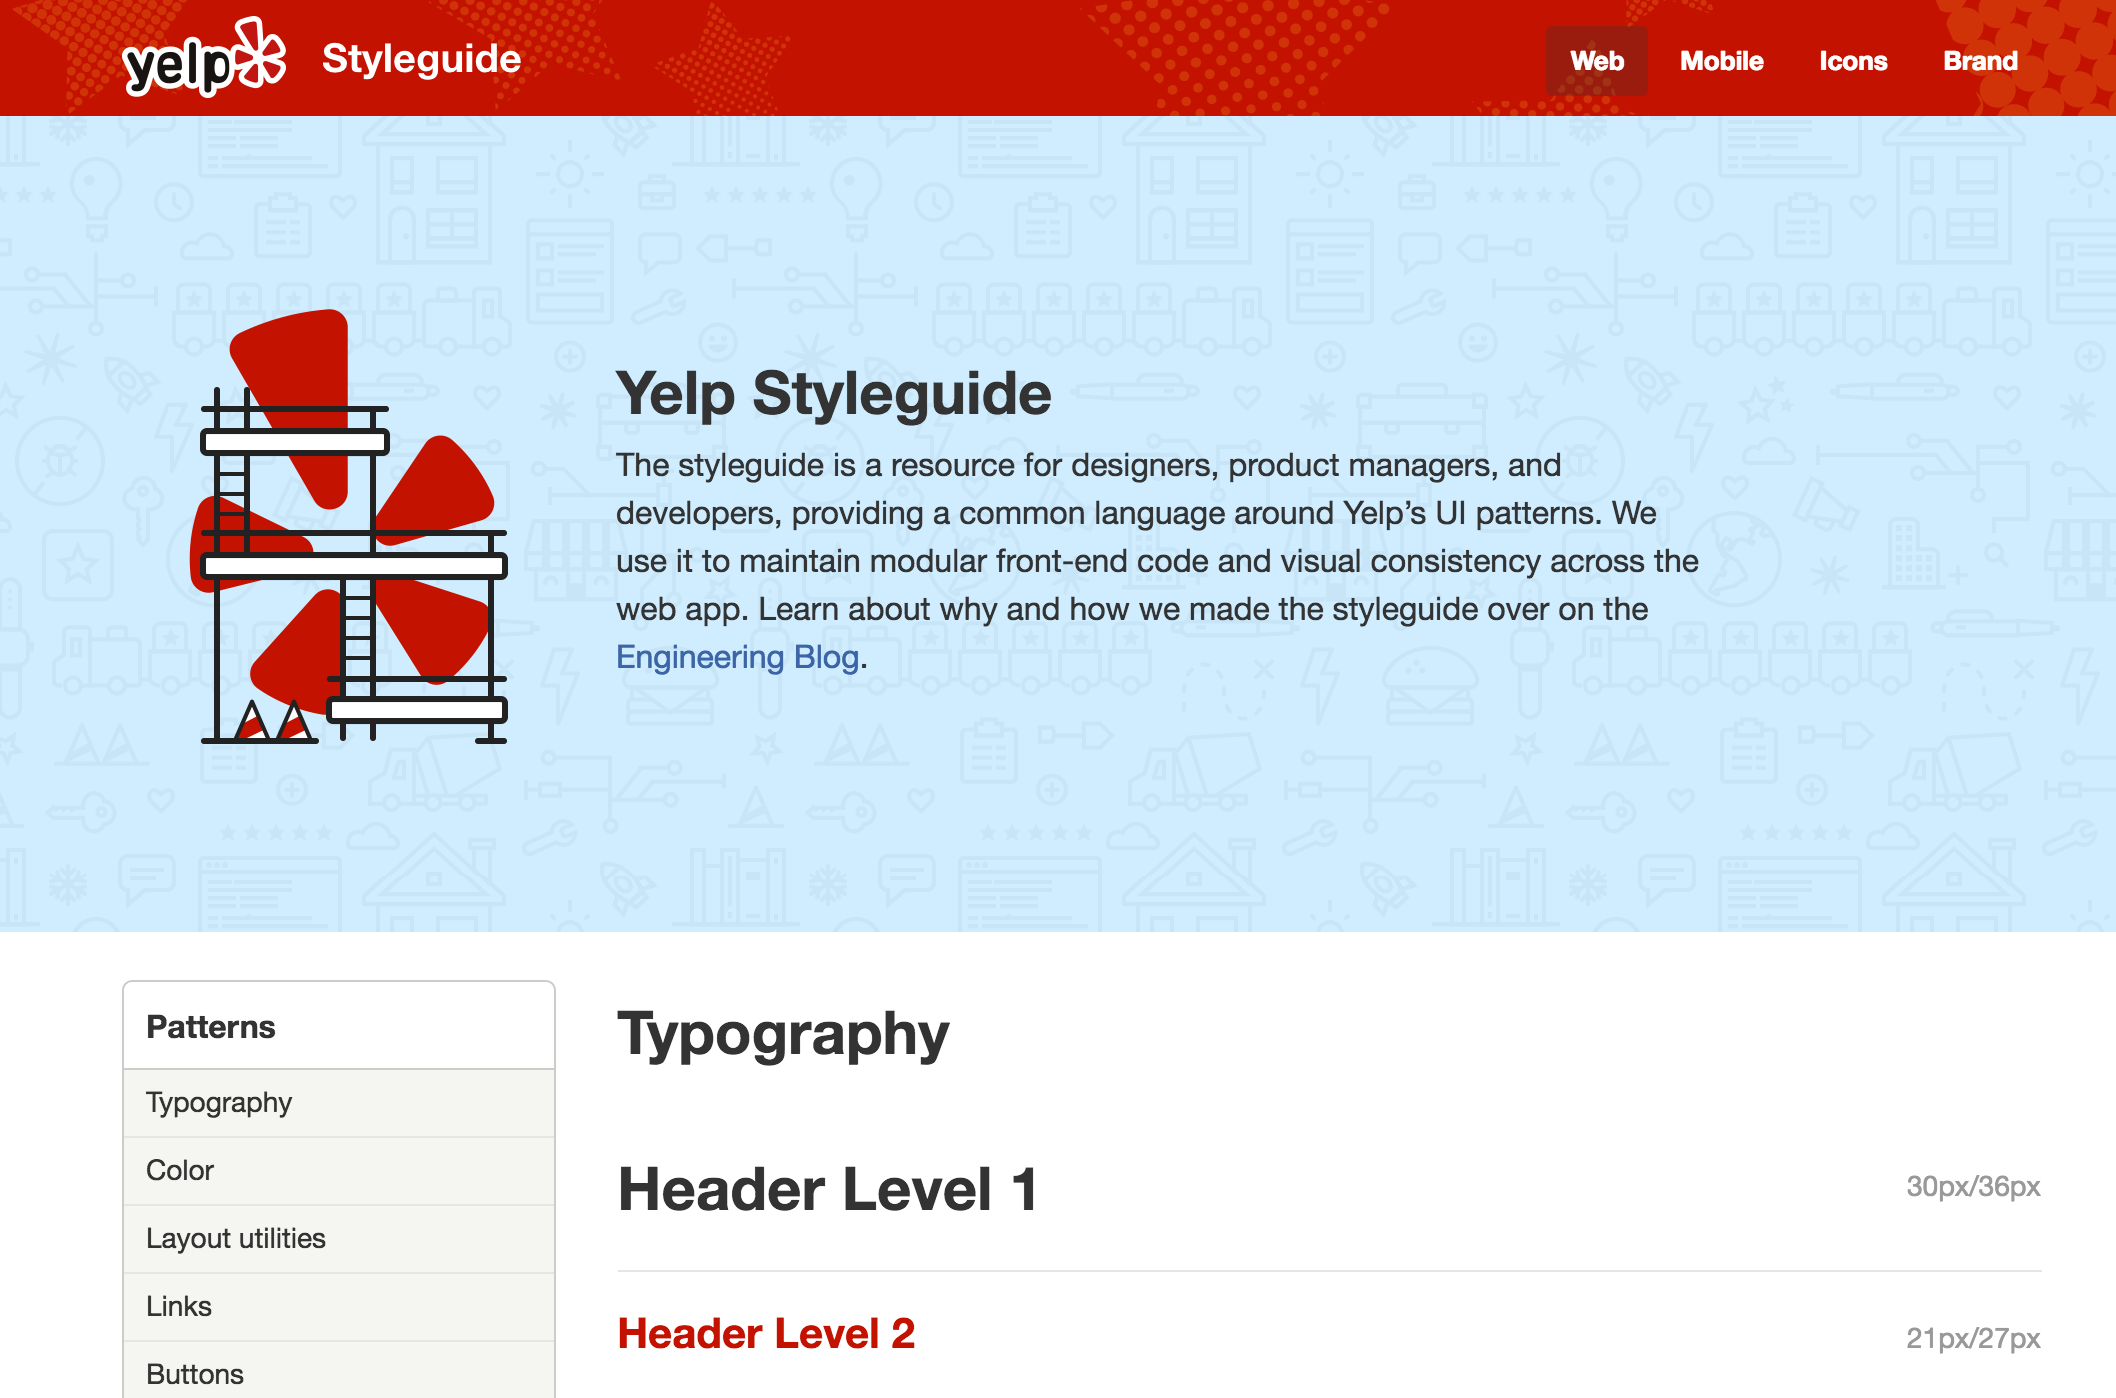 Yelp's style guide homepage sports a handsome design and important intro text explaining the purpose and audience for the guide.